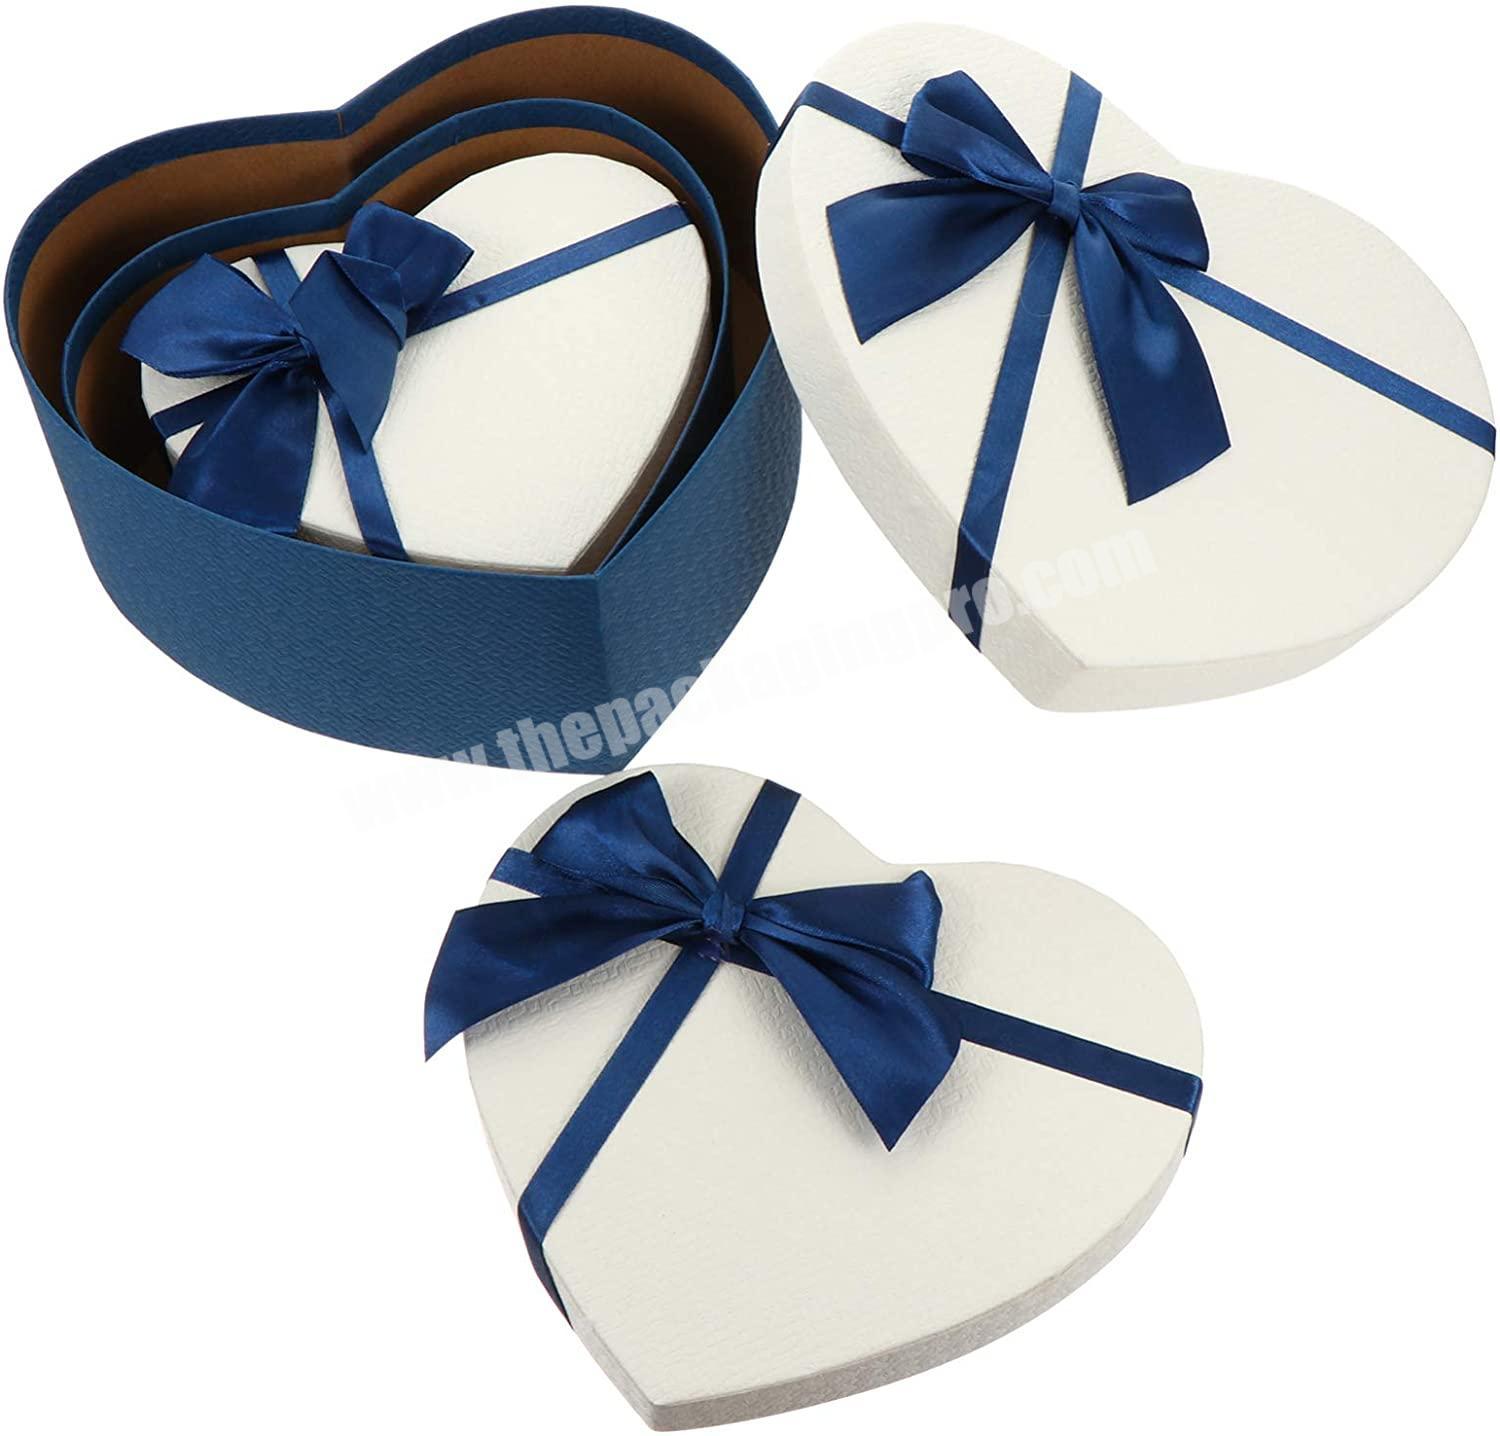 Eco-friendly Heart Shaped Gift Box Cardboard Wedding Birthday Gifts Box With Heart Cover